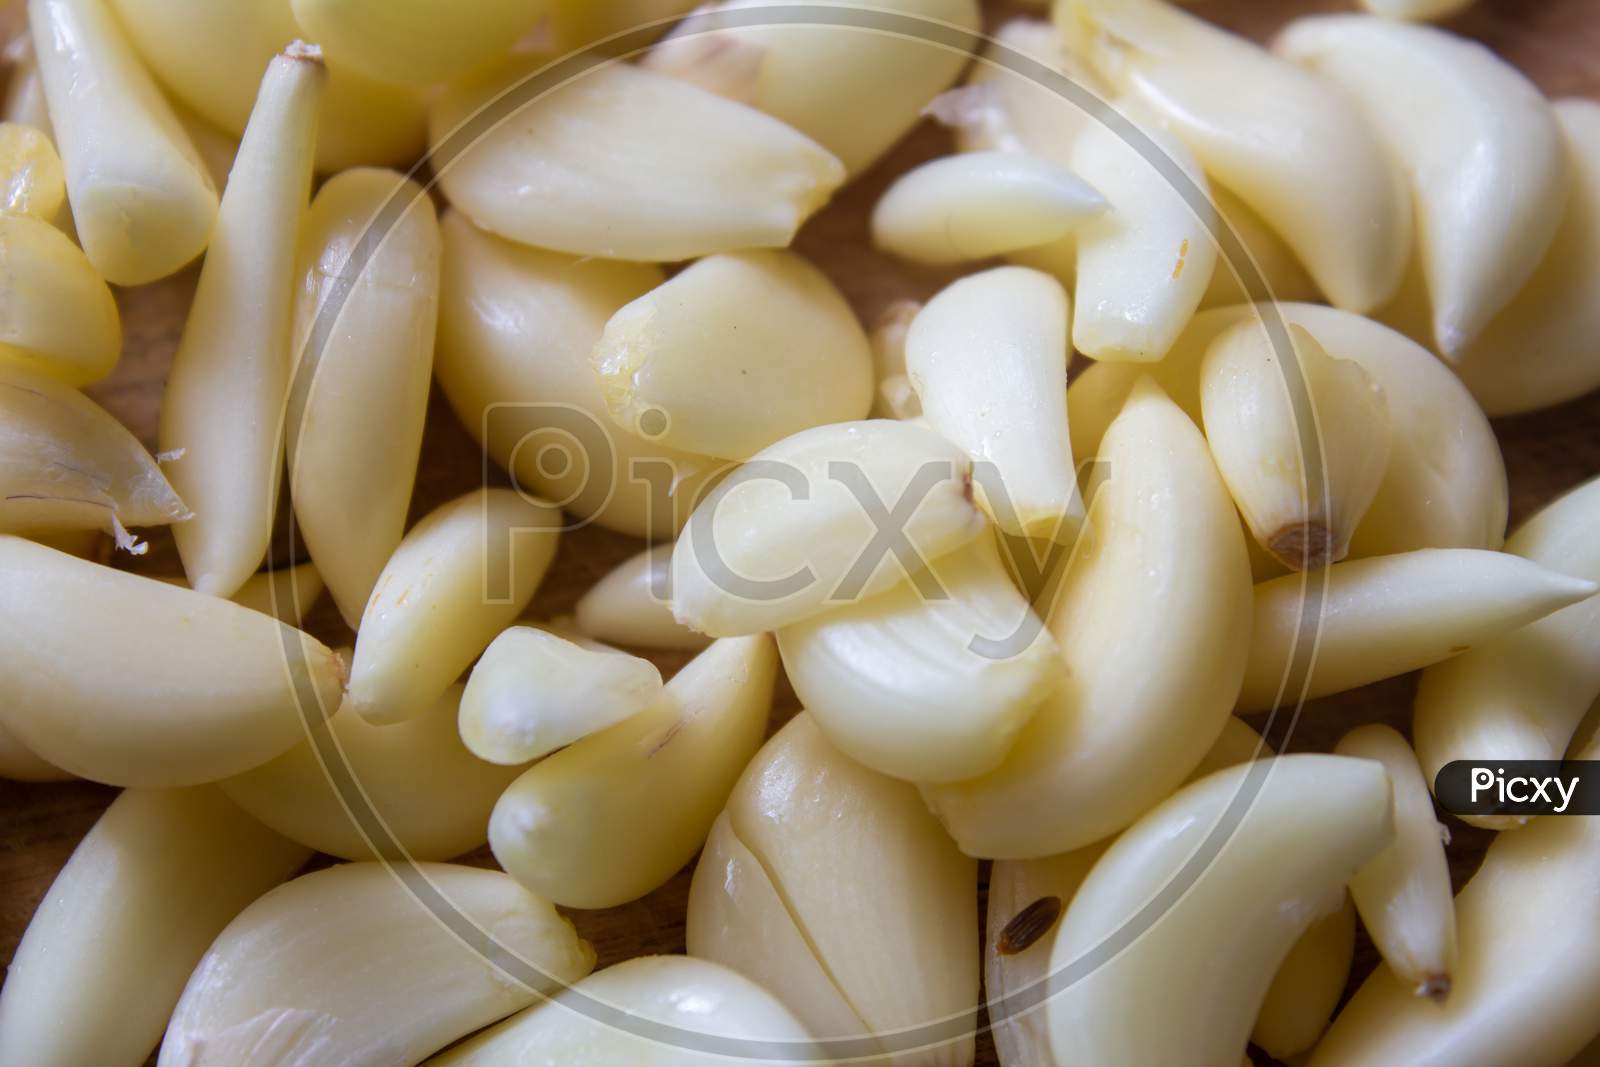 View Of Broken Down Garlic Pieces. Garlic Helps Build Immunity Against Cold And Flu.